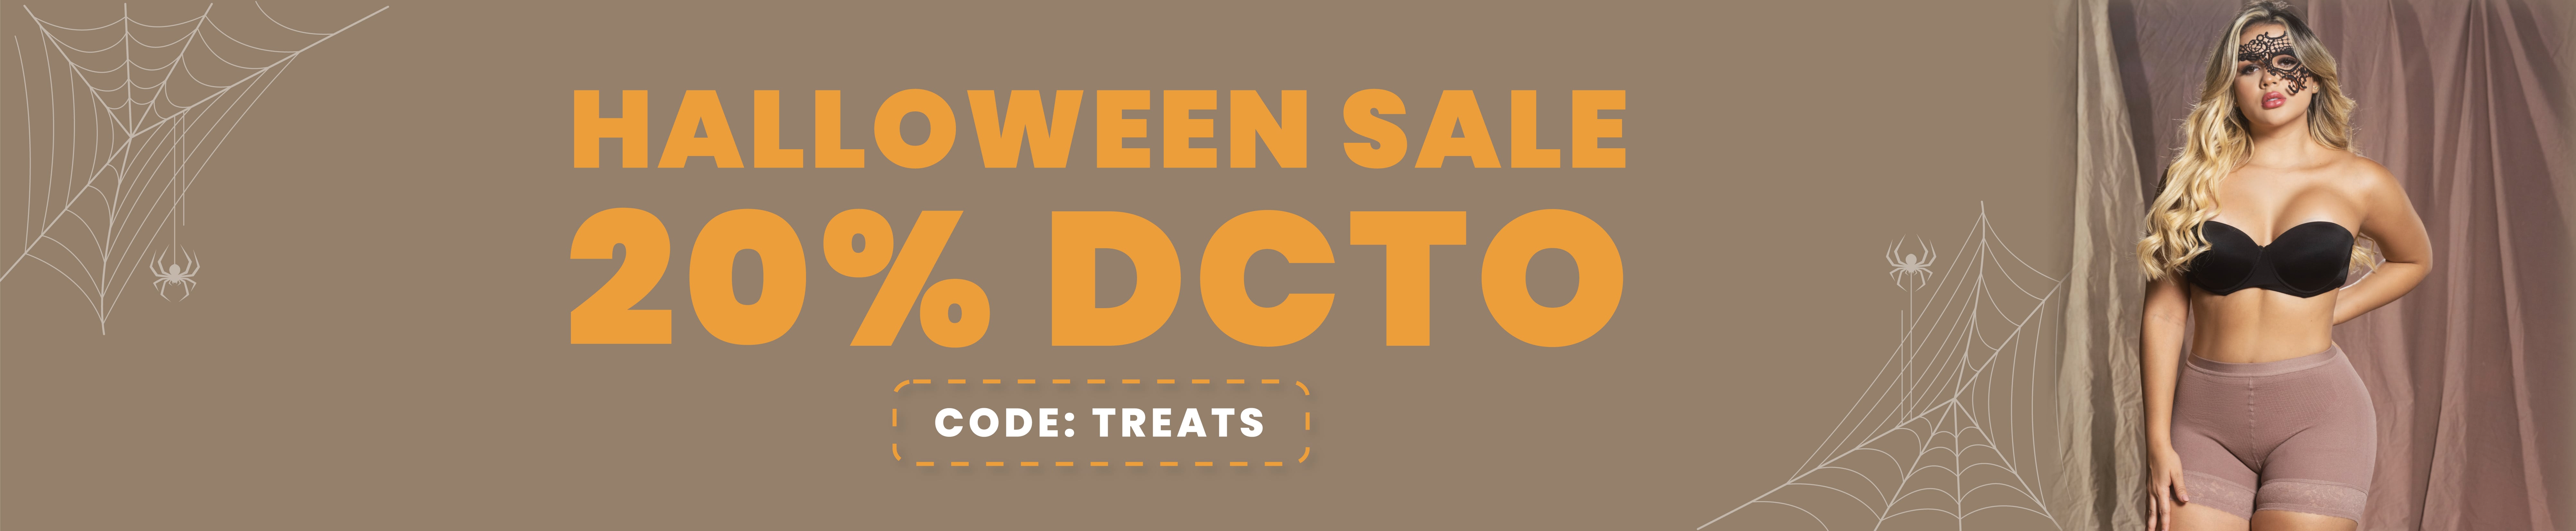 HALLOWEEN SALE COLLECTION 20% OFF - CODE: TREATS